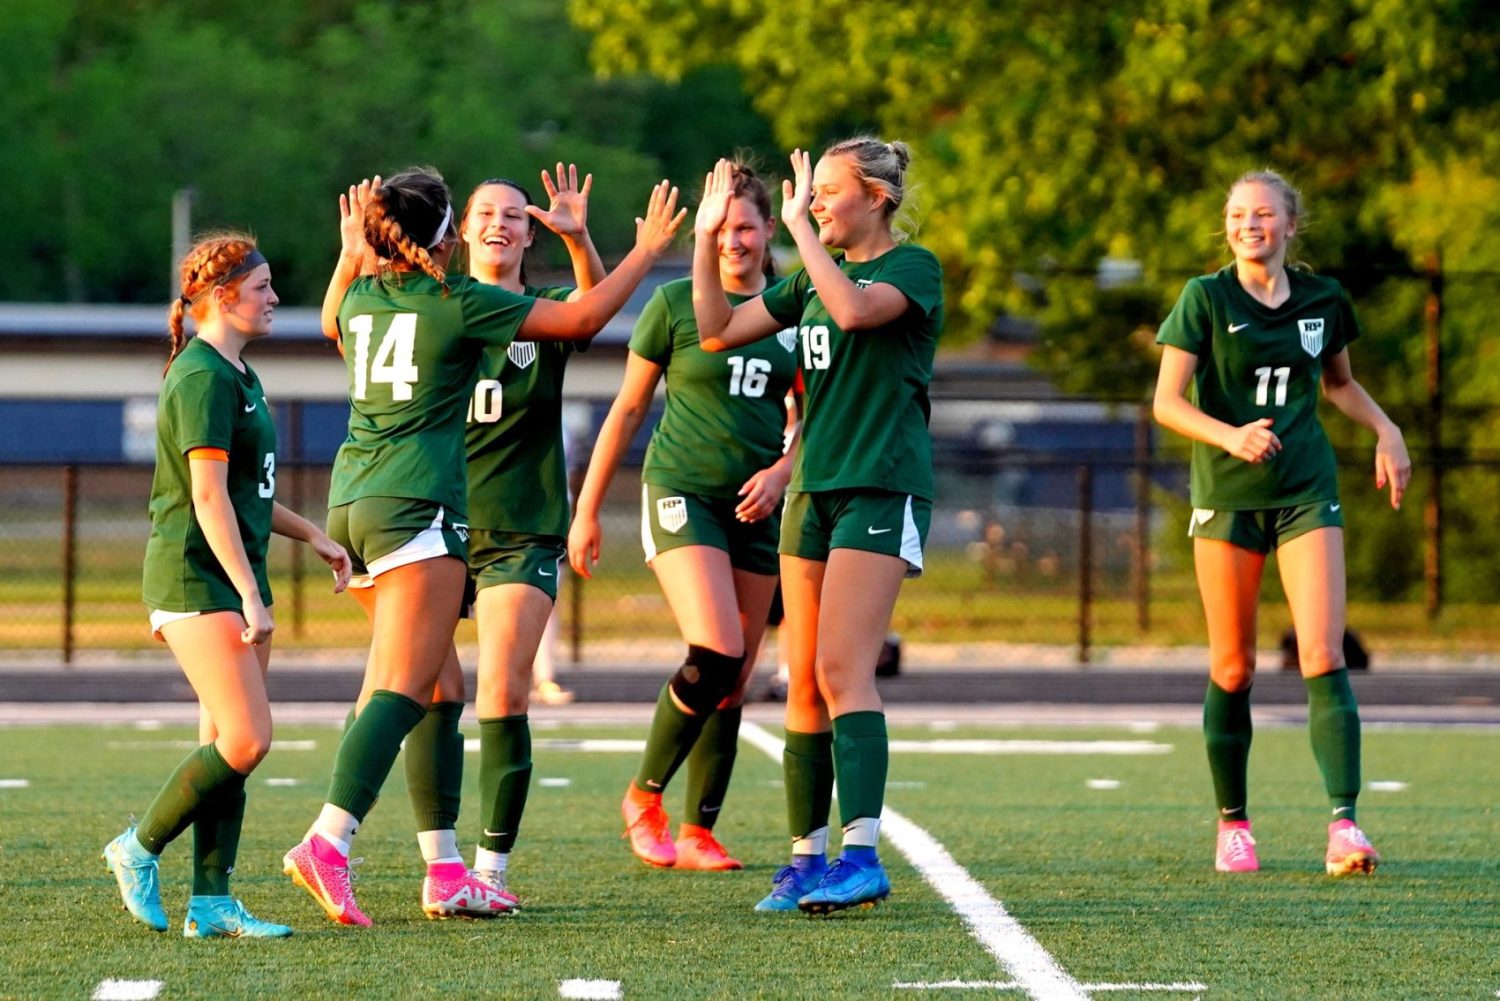 Reeths-Puffer blanks Ludington, advances to take on top-ranked Spring Lake for district title